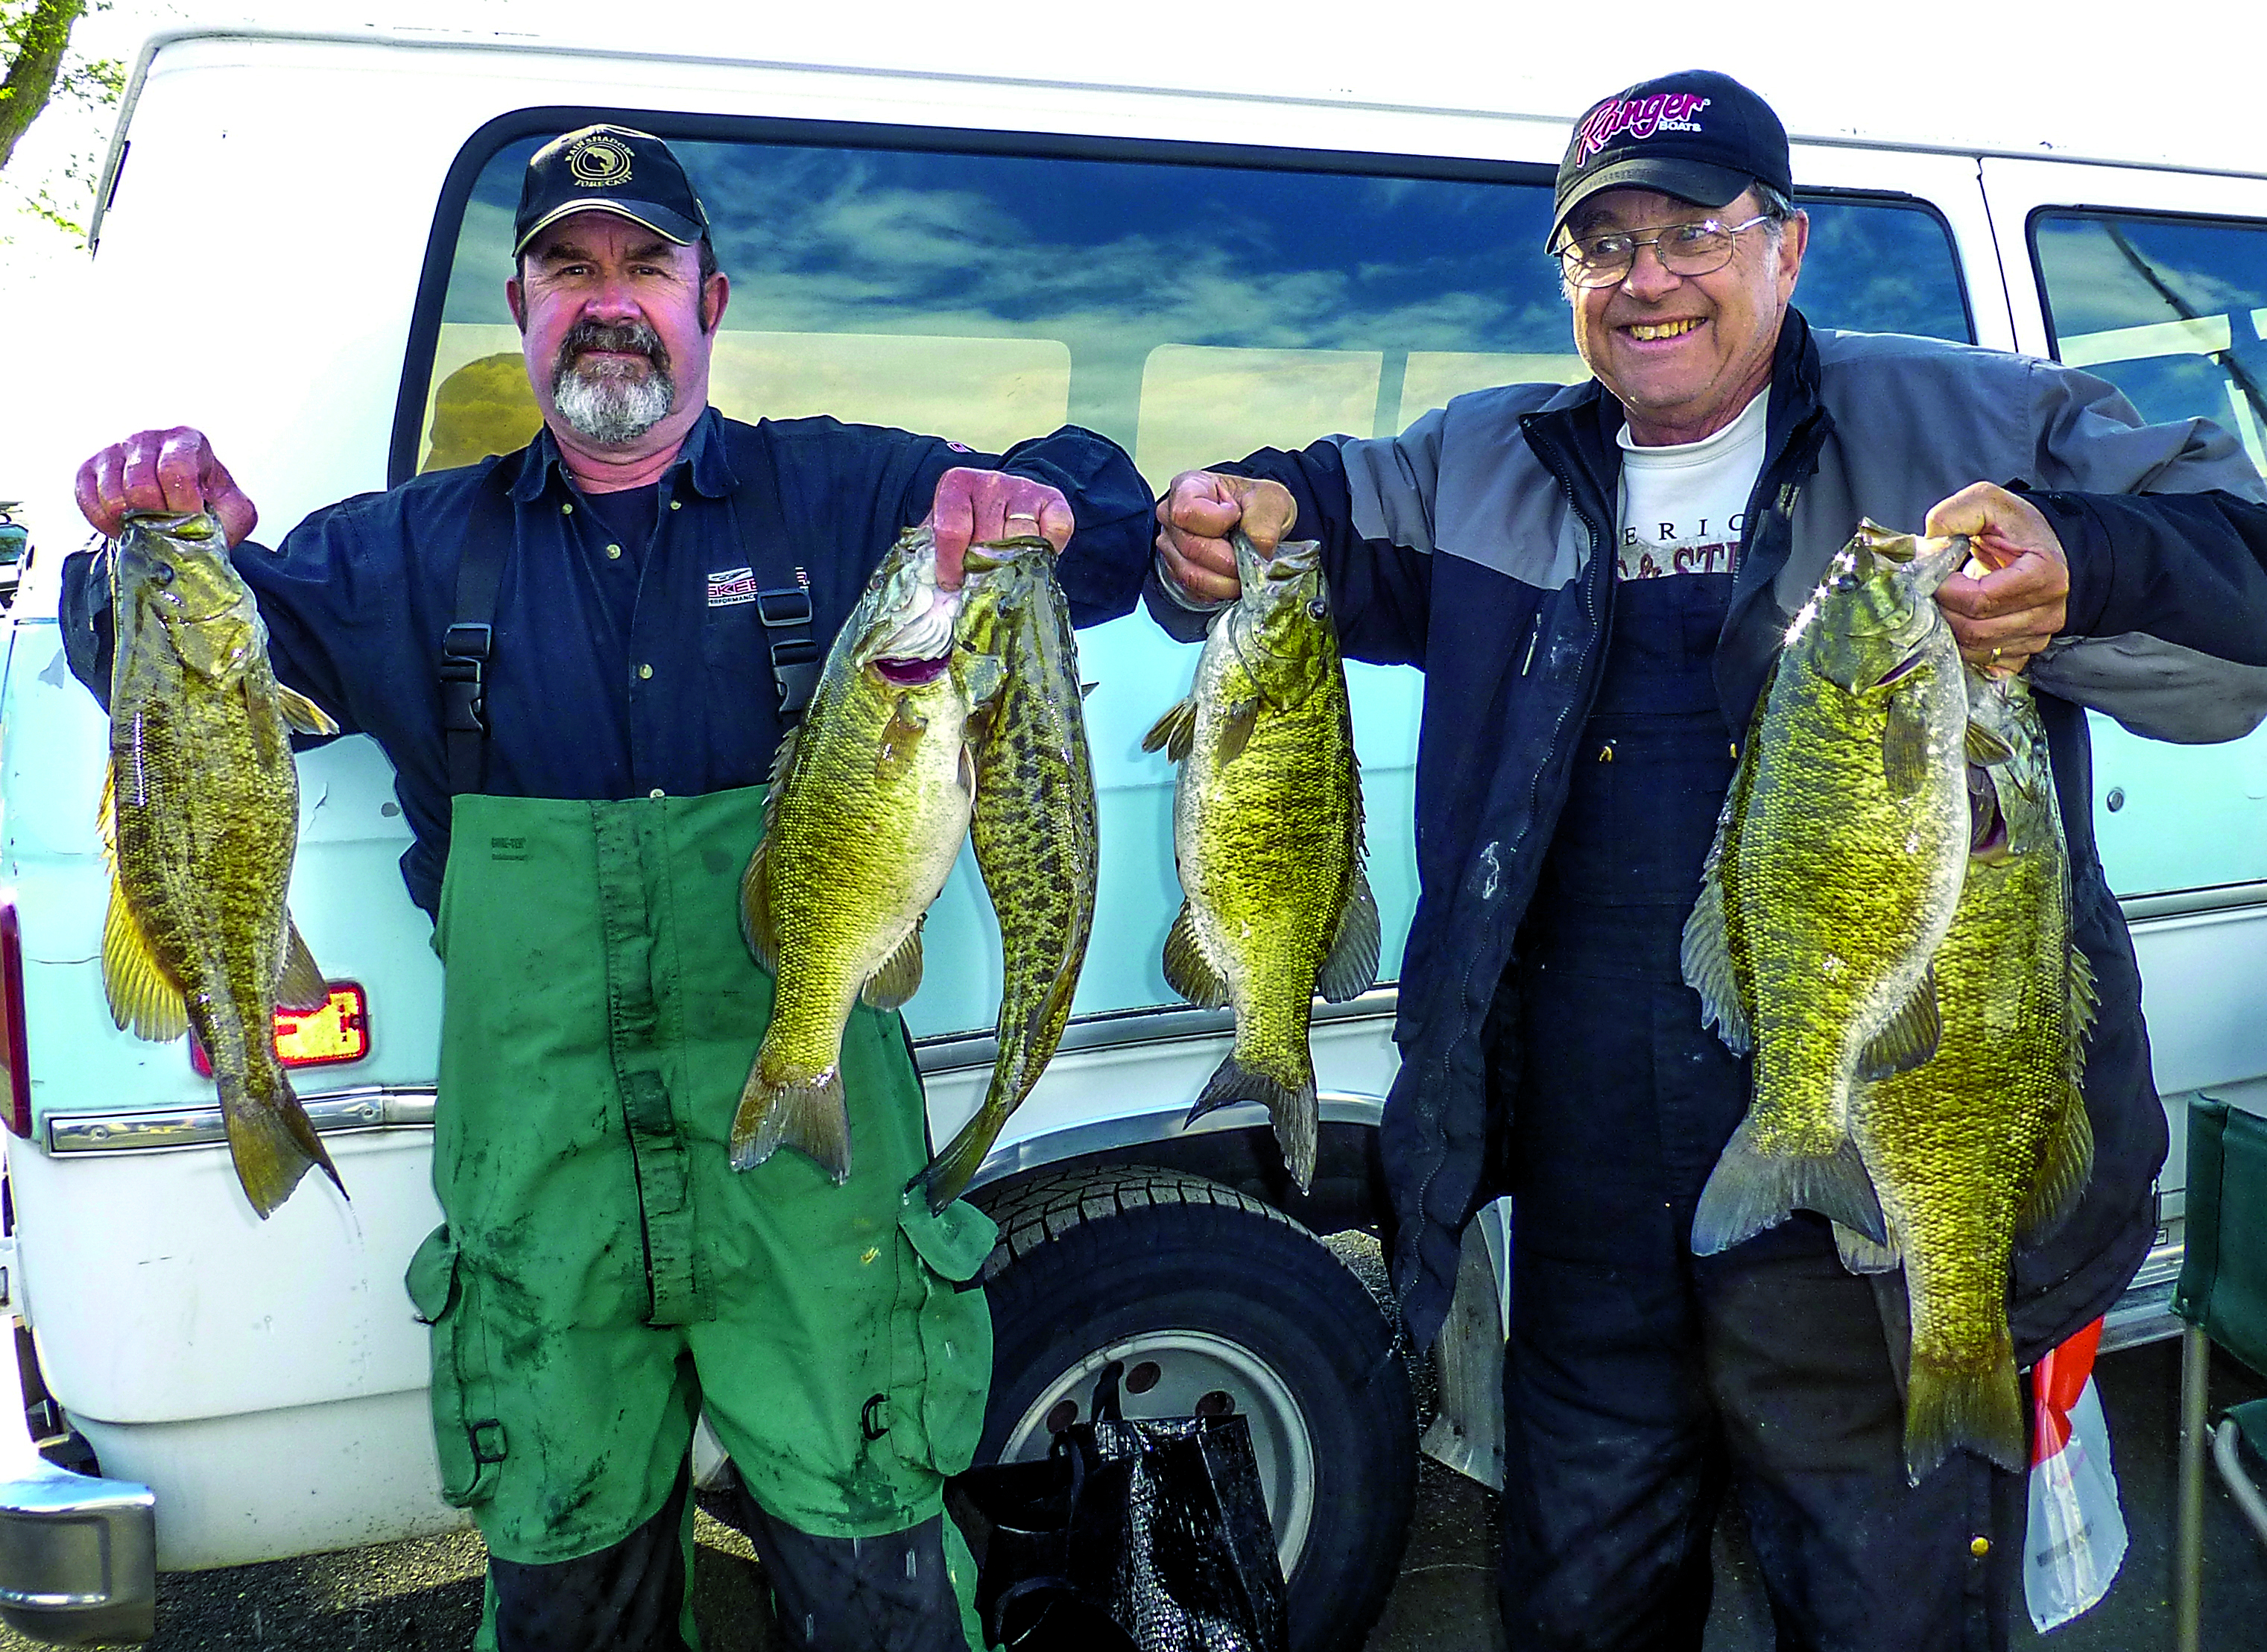 Roger Mosley of Joyce and his friend Bob Steiner of Poulsbo hold up their catch of smallmouth bass from day one of the 35th annual Potholes Open Bass Tournament near Moses Lake.